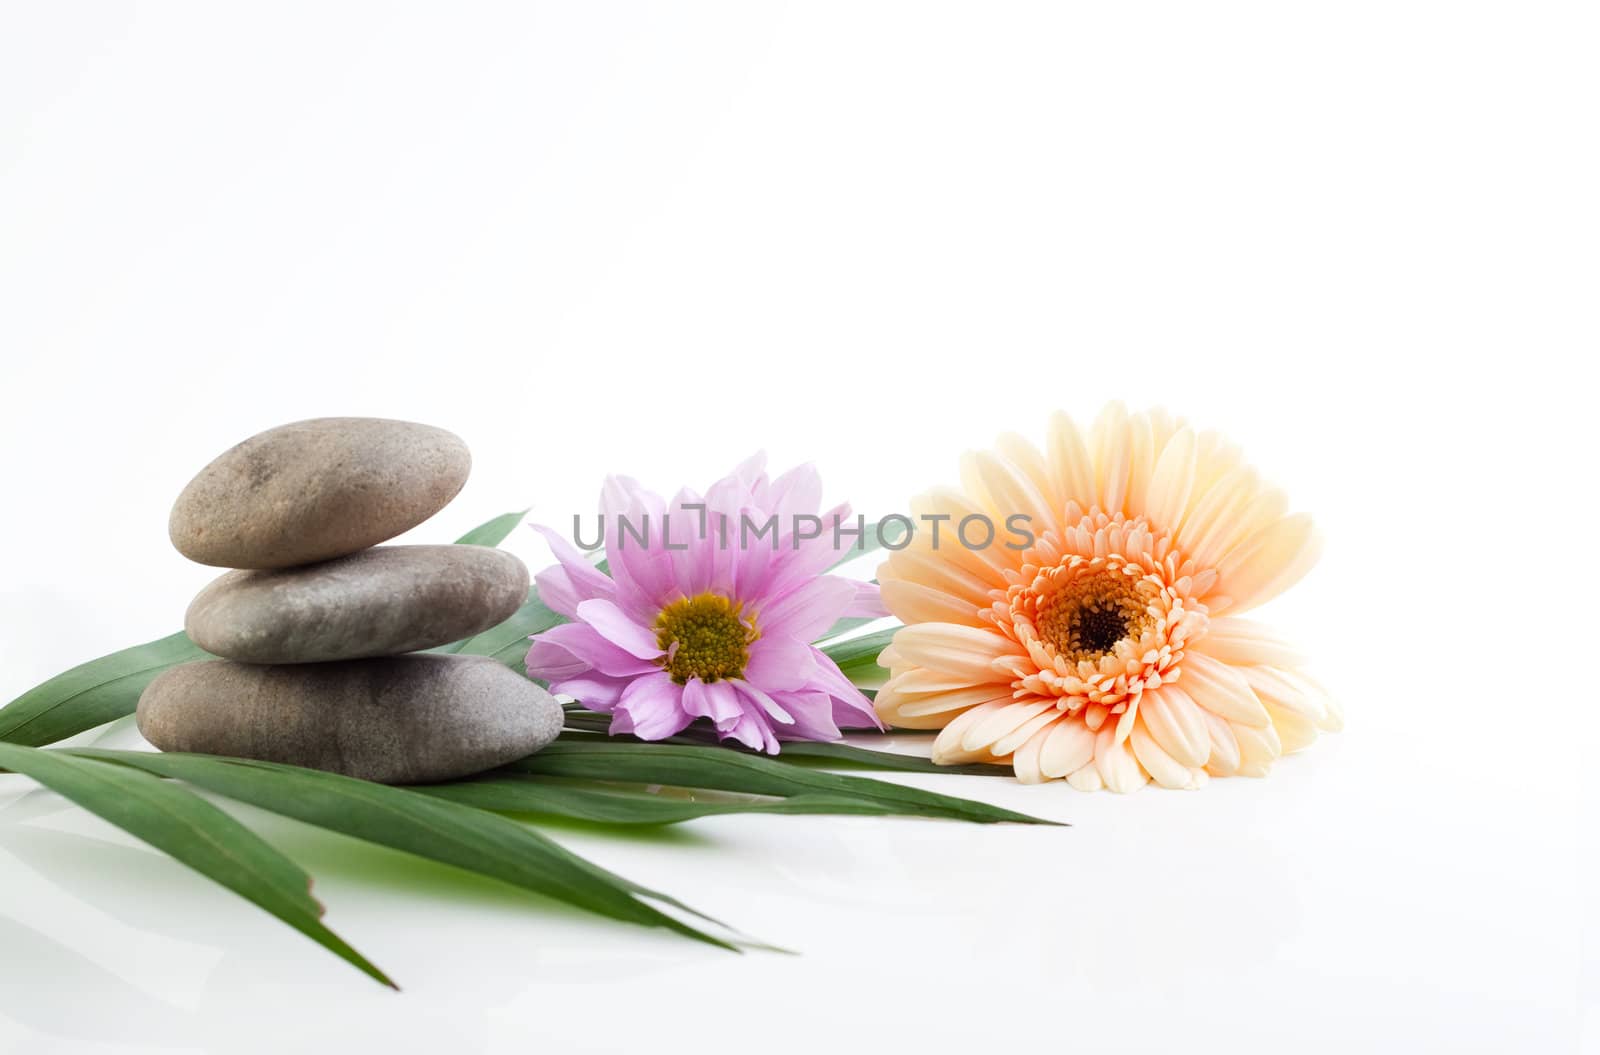 Flowers and stones - spa theme by azschach